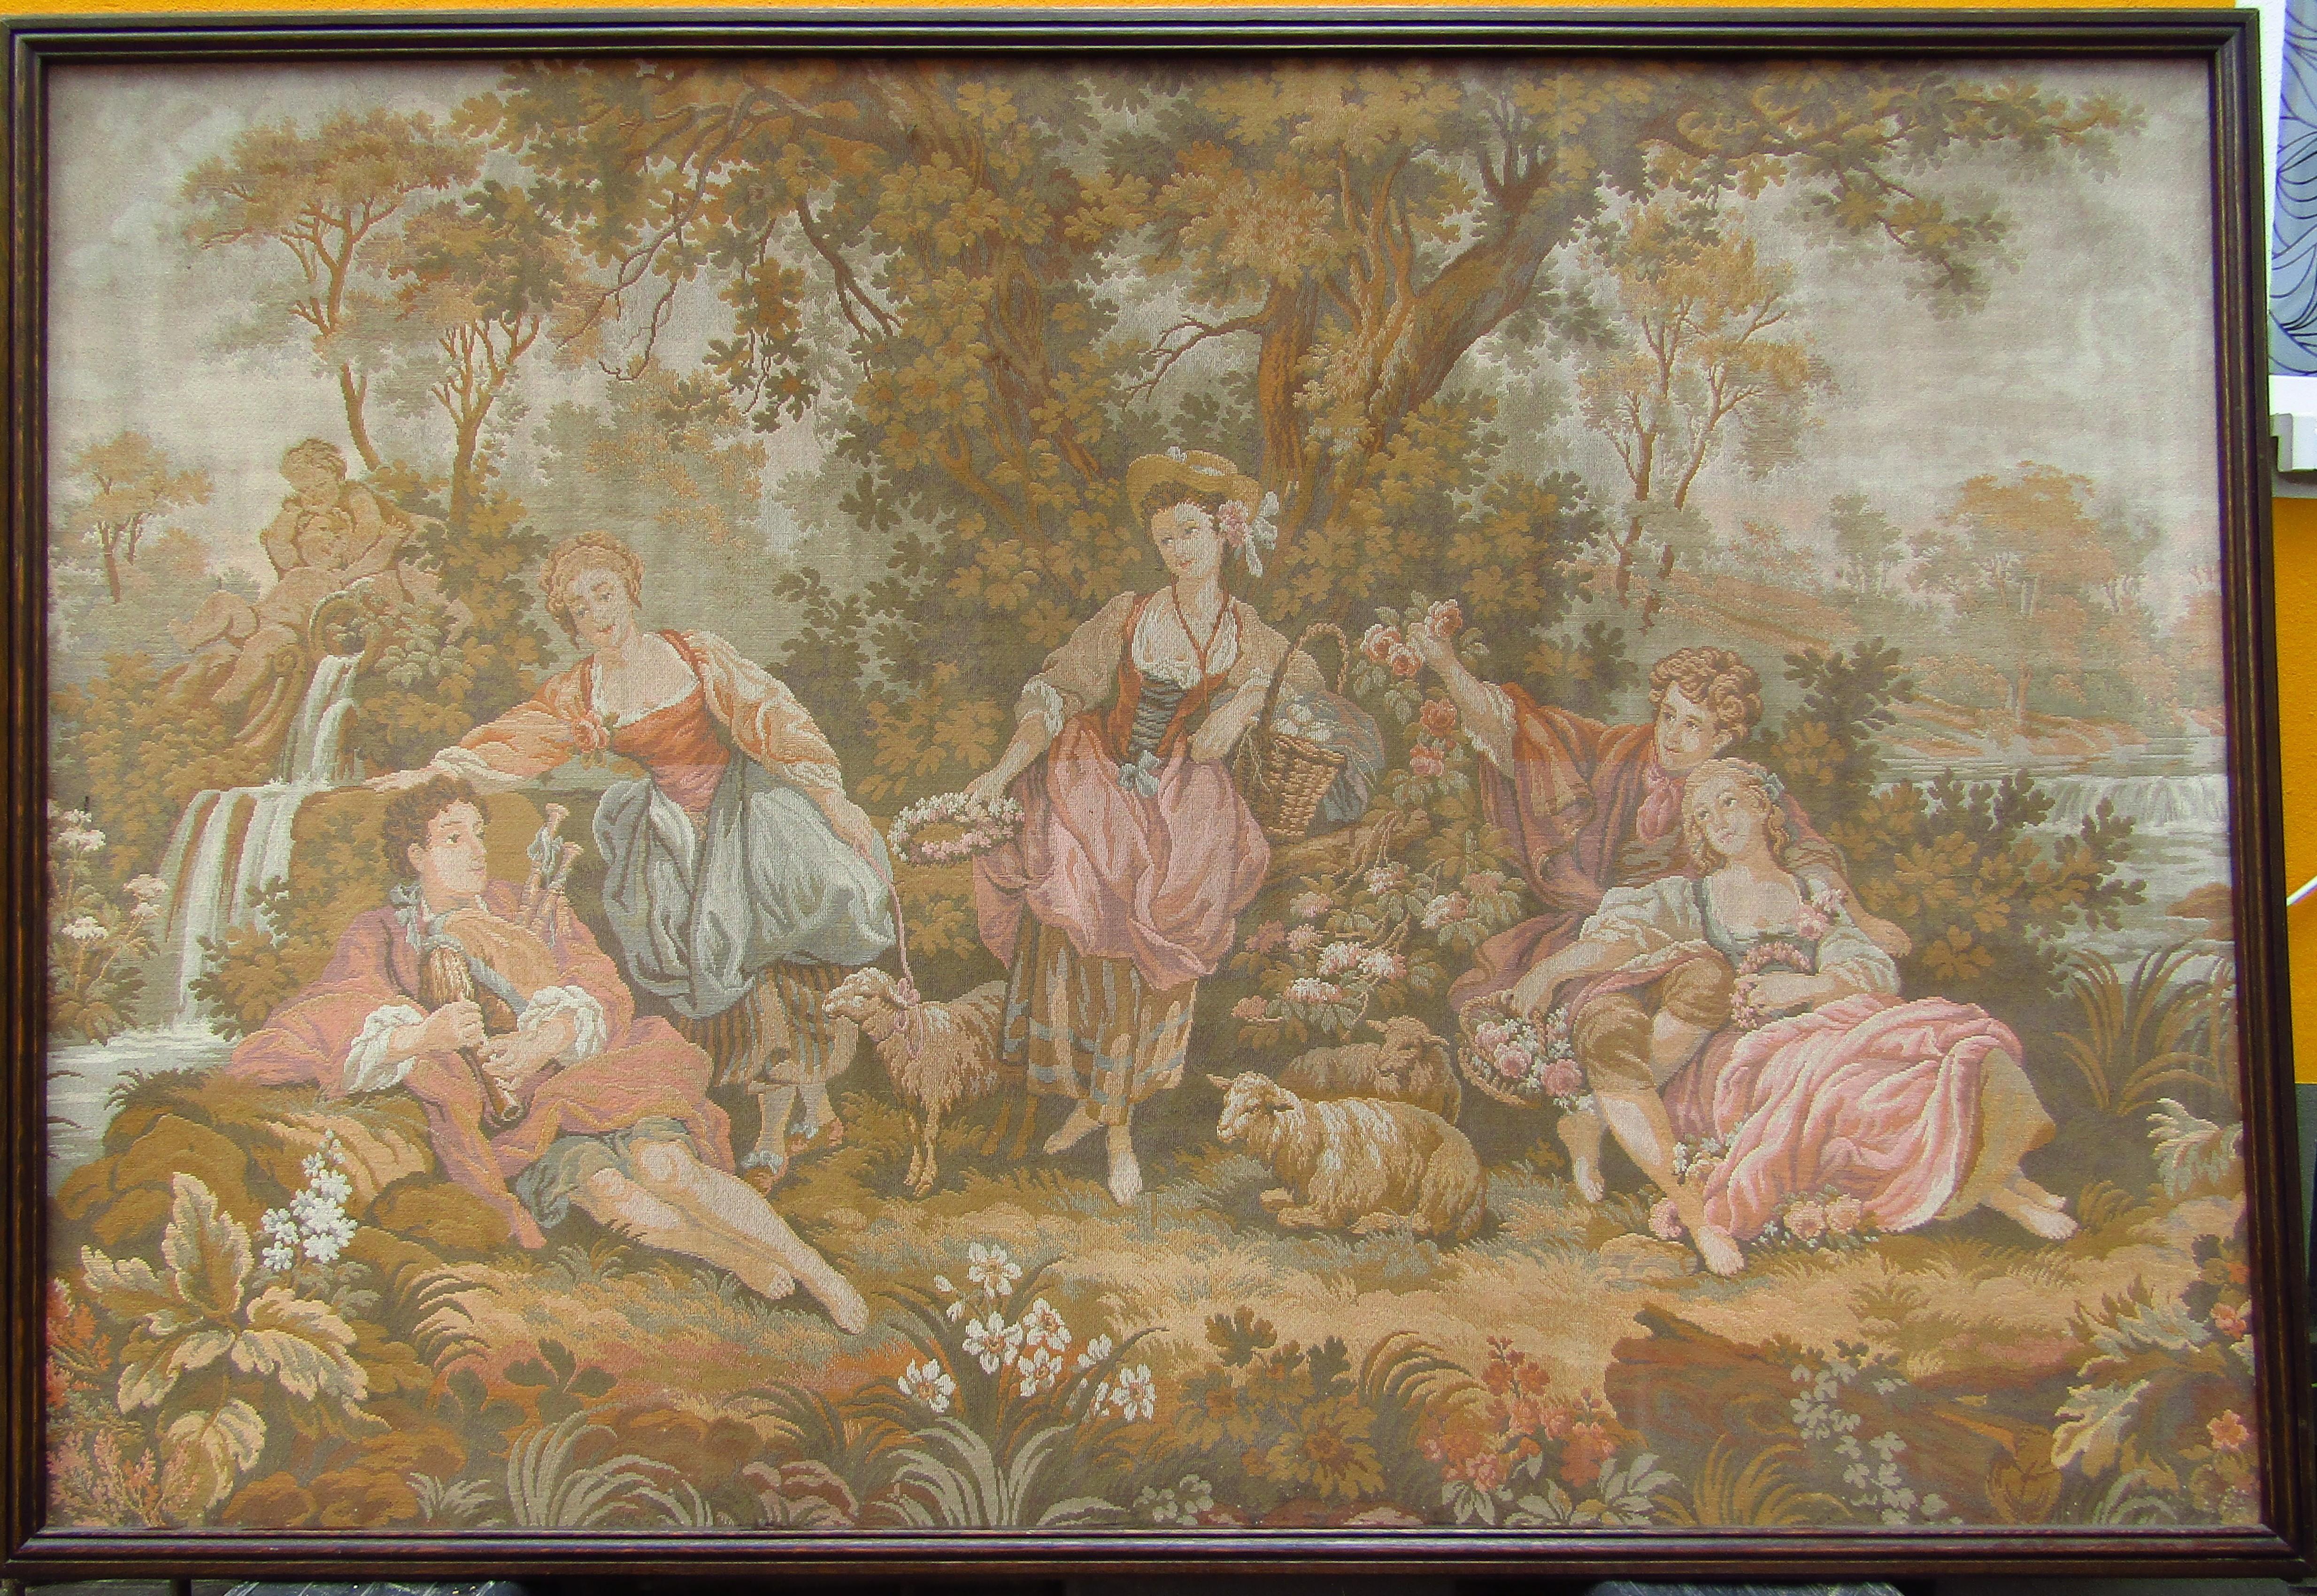 Original French tapestry Aubusson style, France, 1880. Wall decoration (machine) woven, no print. Good vintage condition.

Free shipping quote  without frame.
please ask for quote with frame